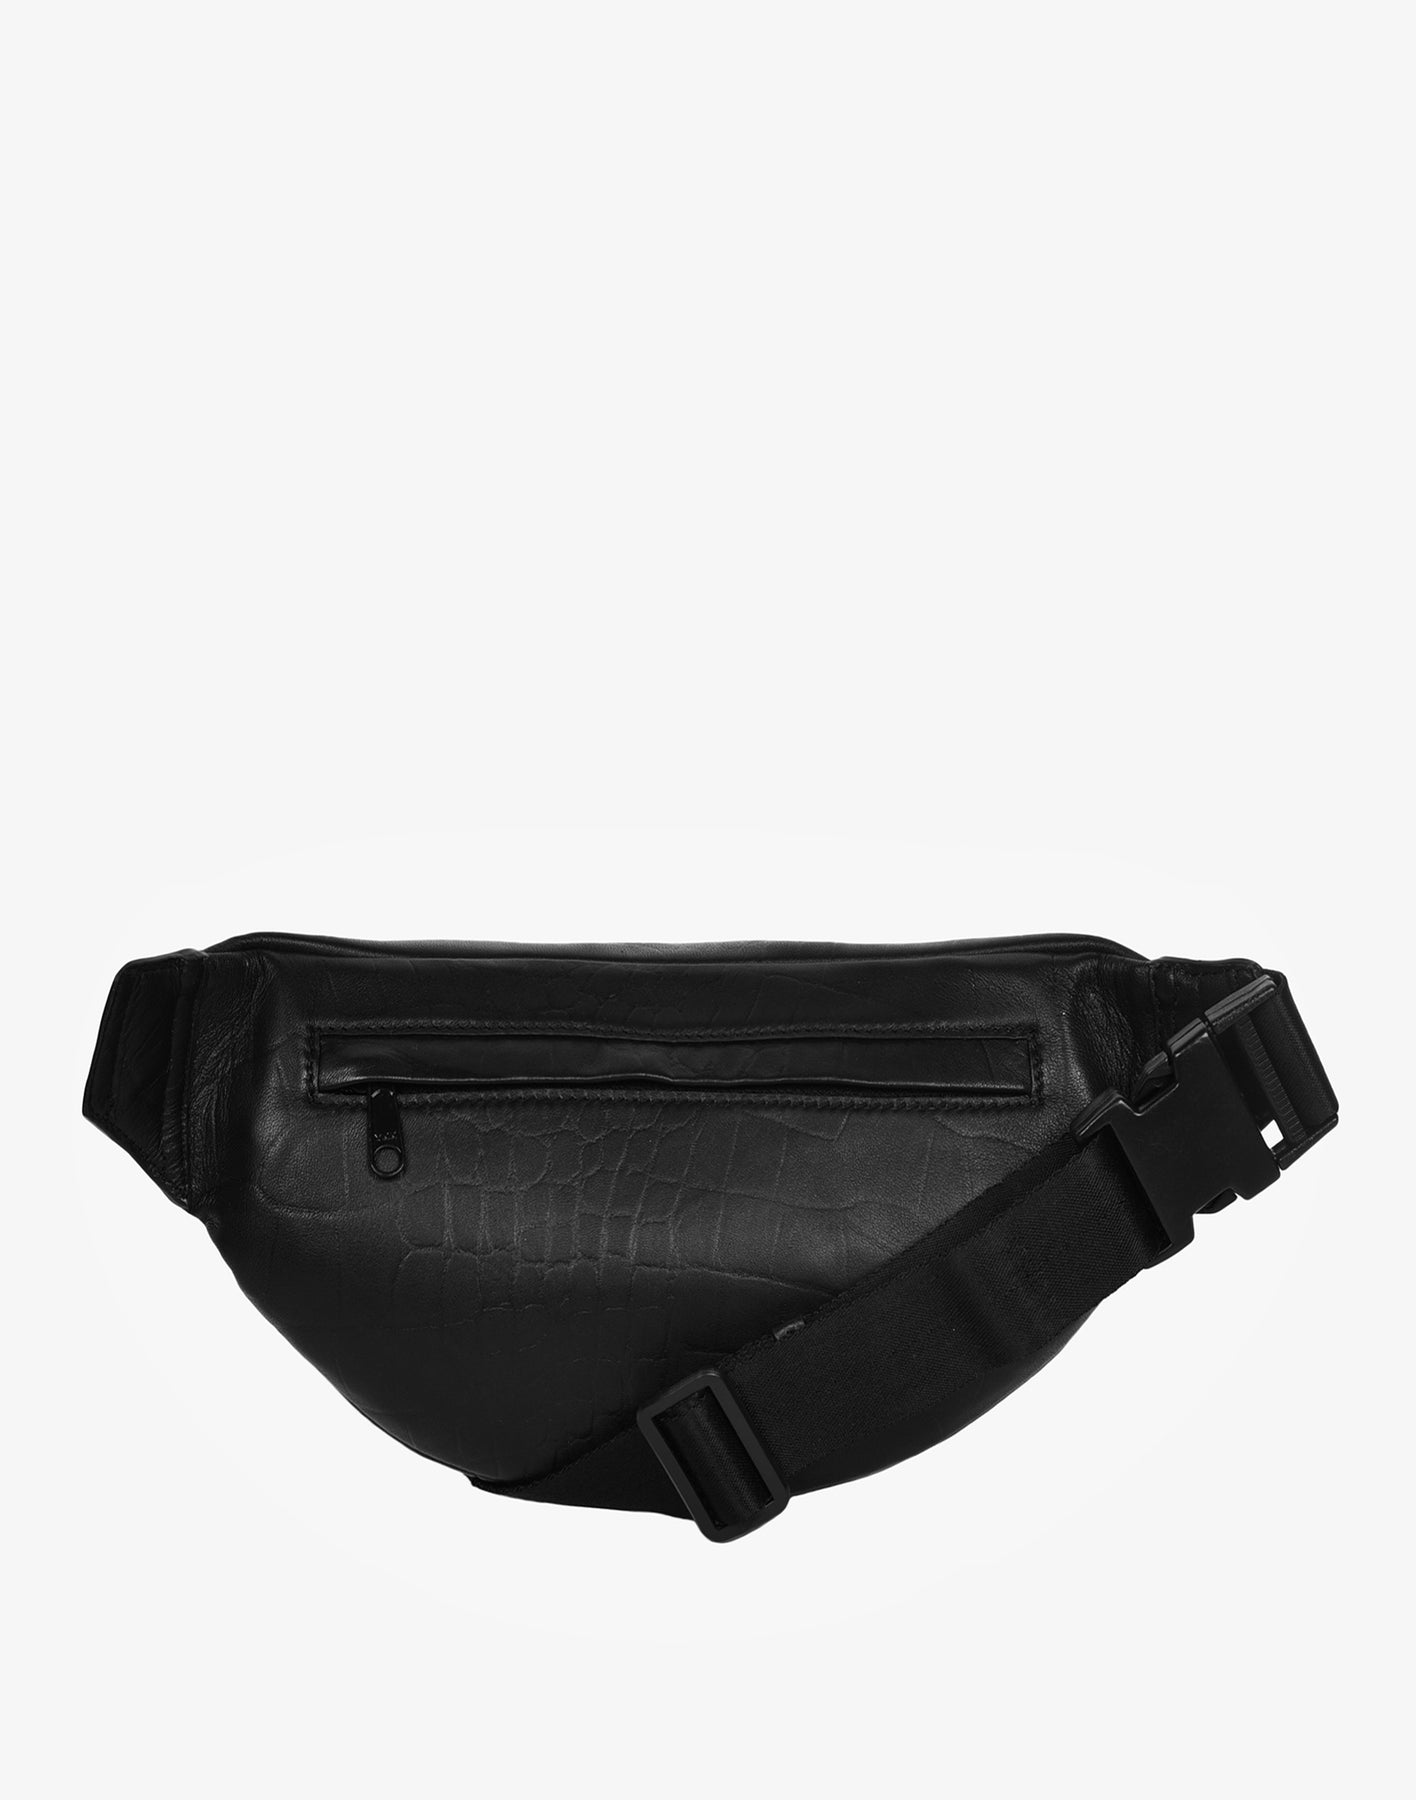 Big Upcycled Leather Fanny Pack Big Upcycled Leather Fanny Pack | Hyer ...